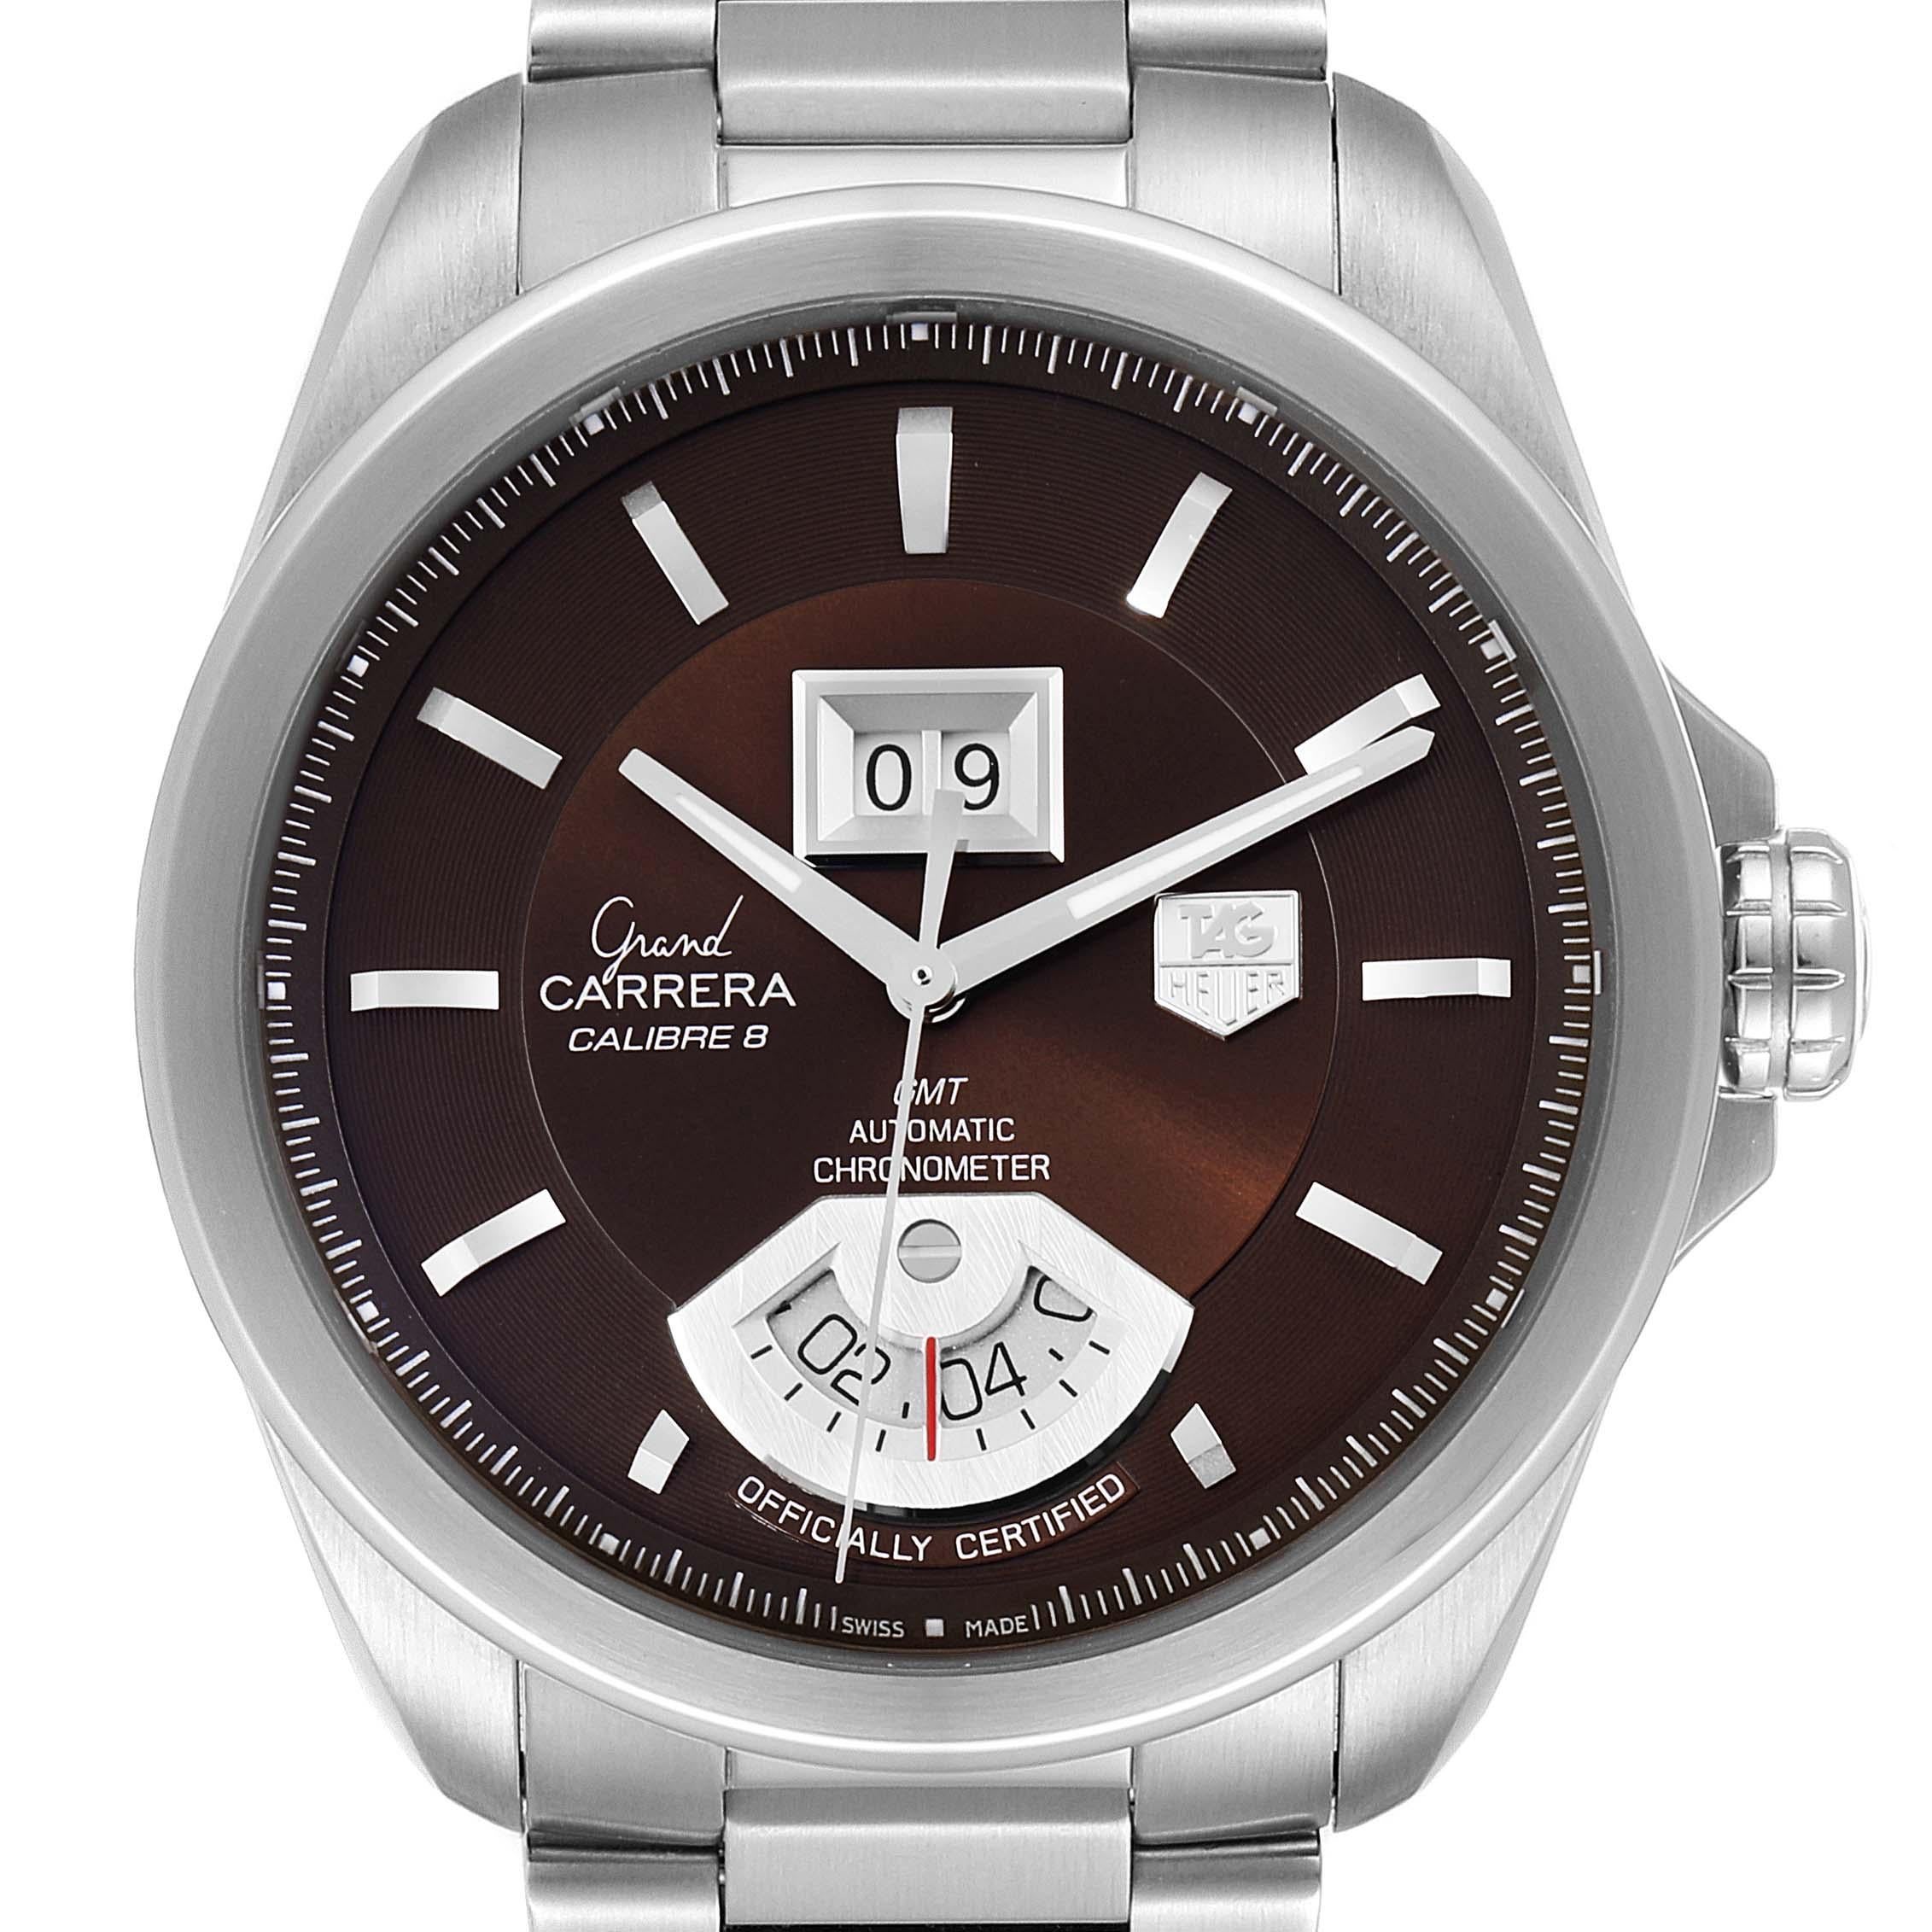 Tag Heuer Grand Carrera Grand Date GMT Brown Dial Mens Watch WAV5113. Automatic self-winding GMT movement. Stainless steel case 42.5 mm. Transperent sapphire crystal case back. Stainless steel bezel . Scratch resistant sapphire crystal. Brown dial